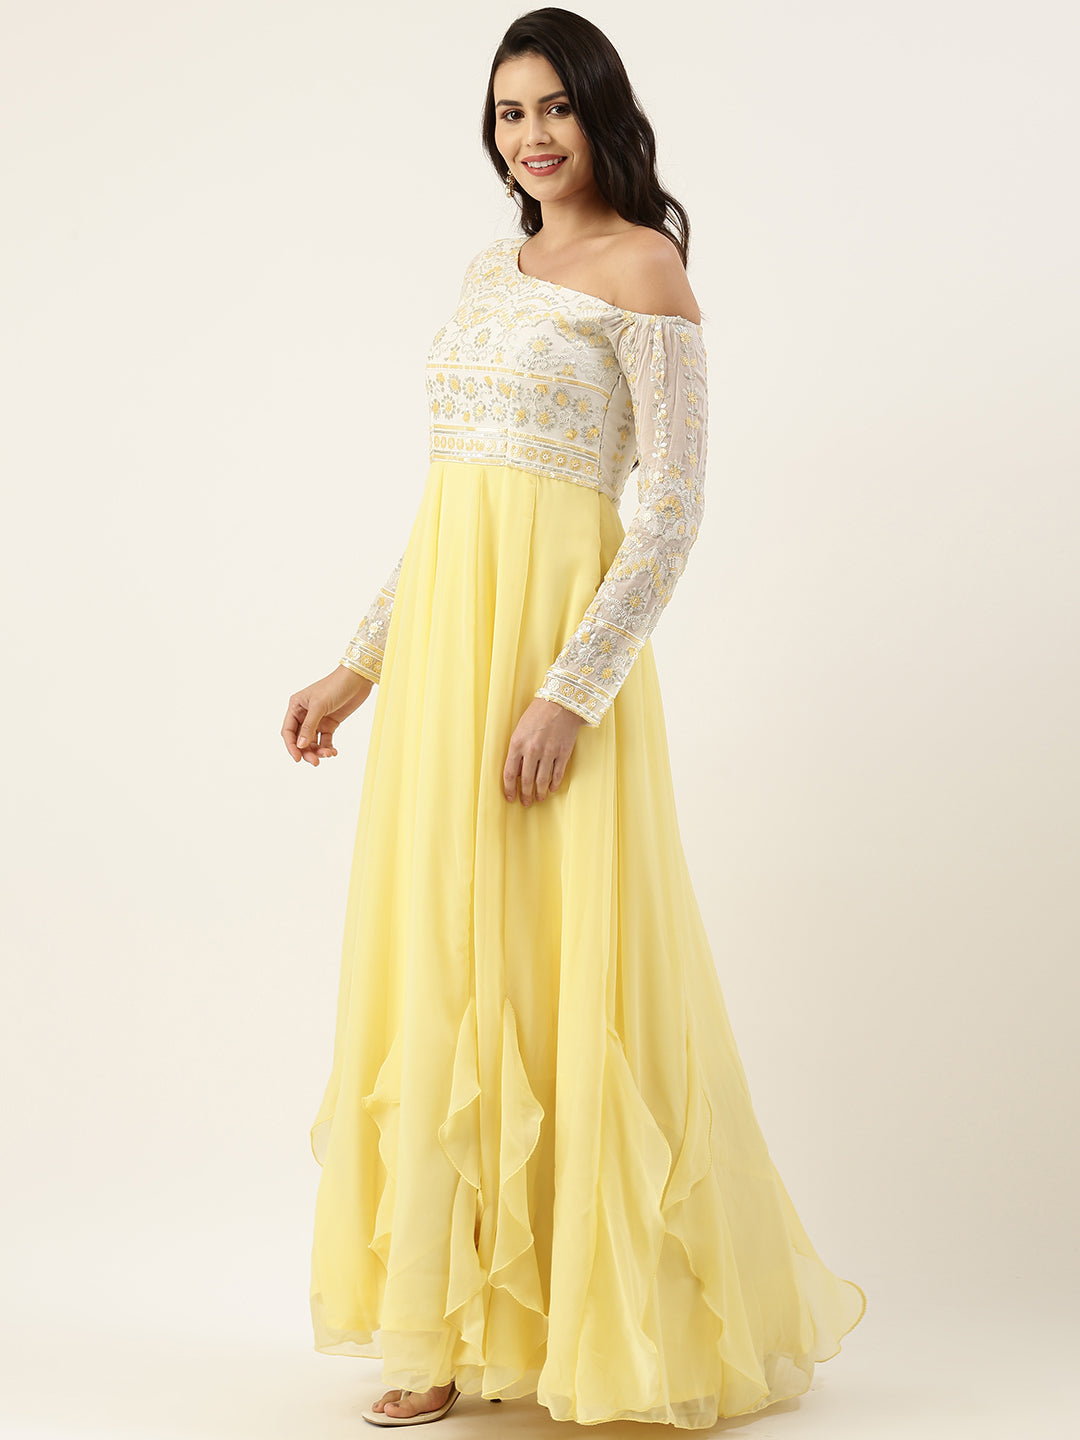 White-&-Yellow-Embroidered-One-Shoulder-Gown